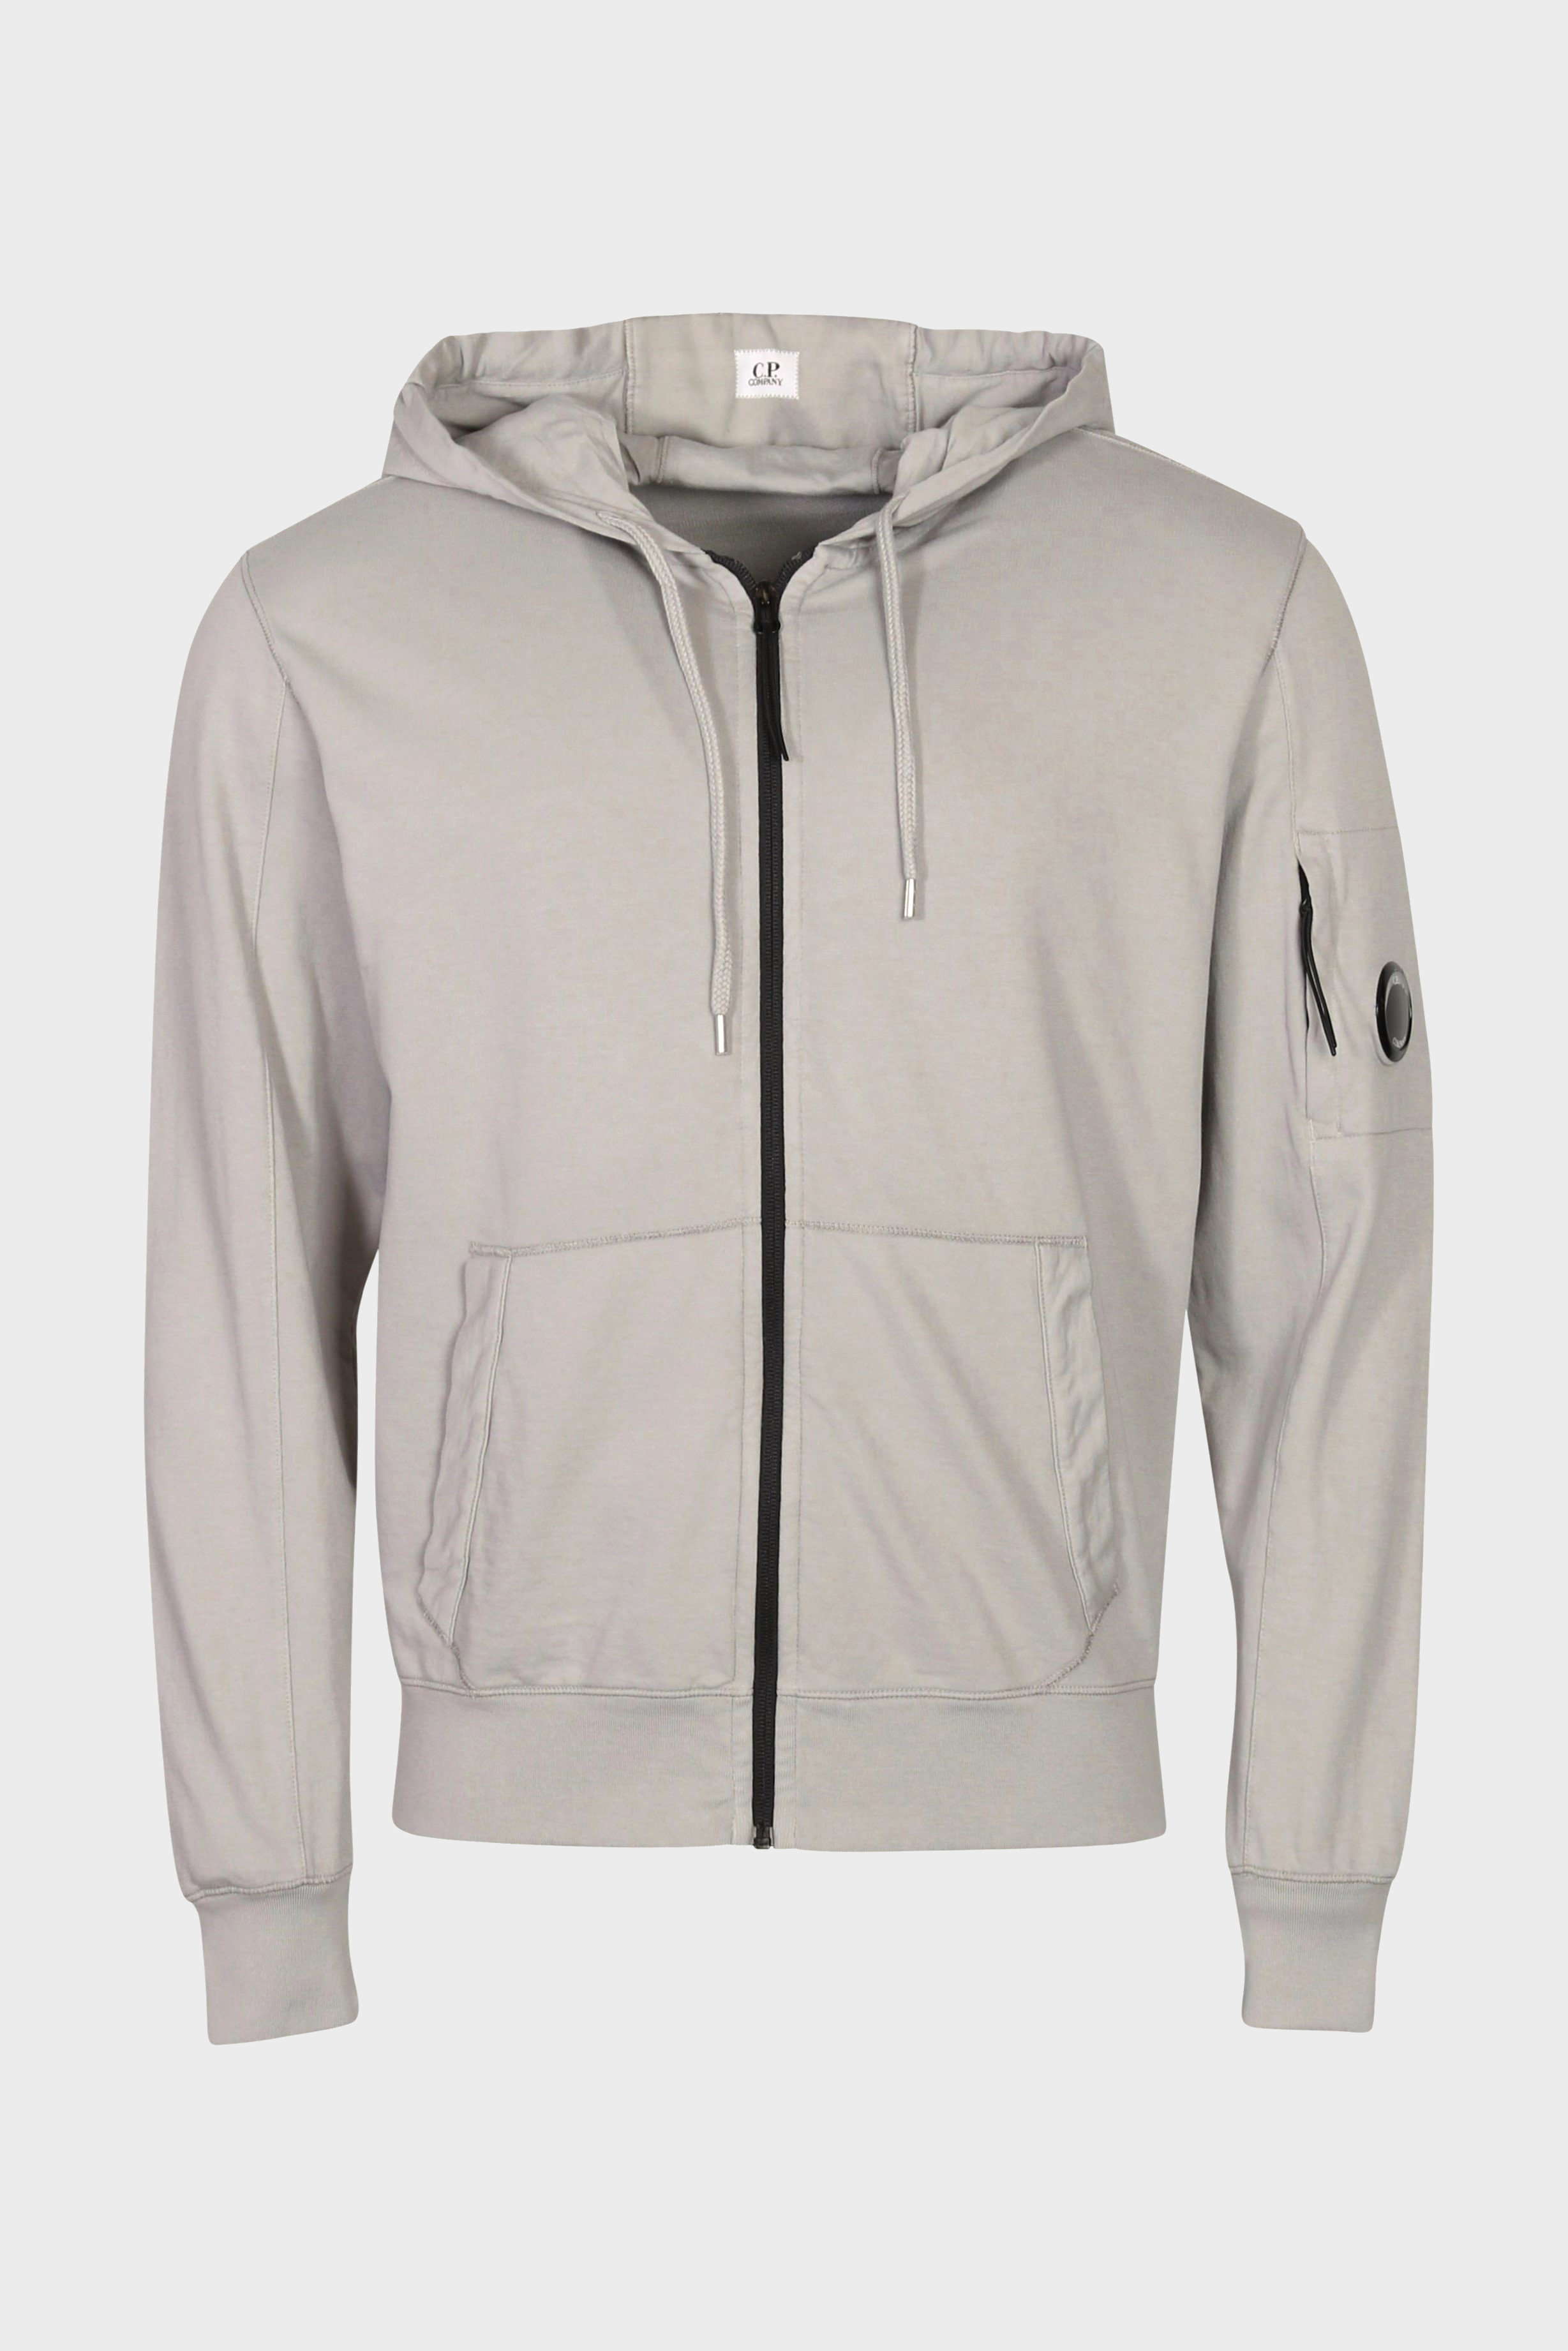 C.P. COMPANY Hooded Zip Jacket in Drizzle Grey